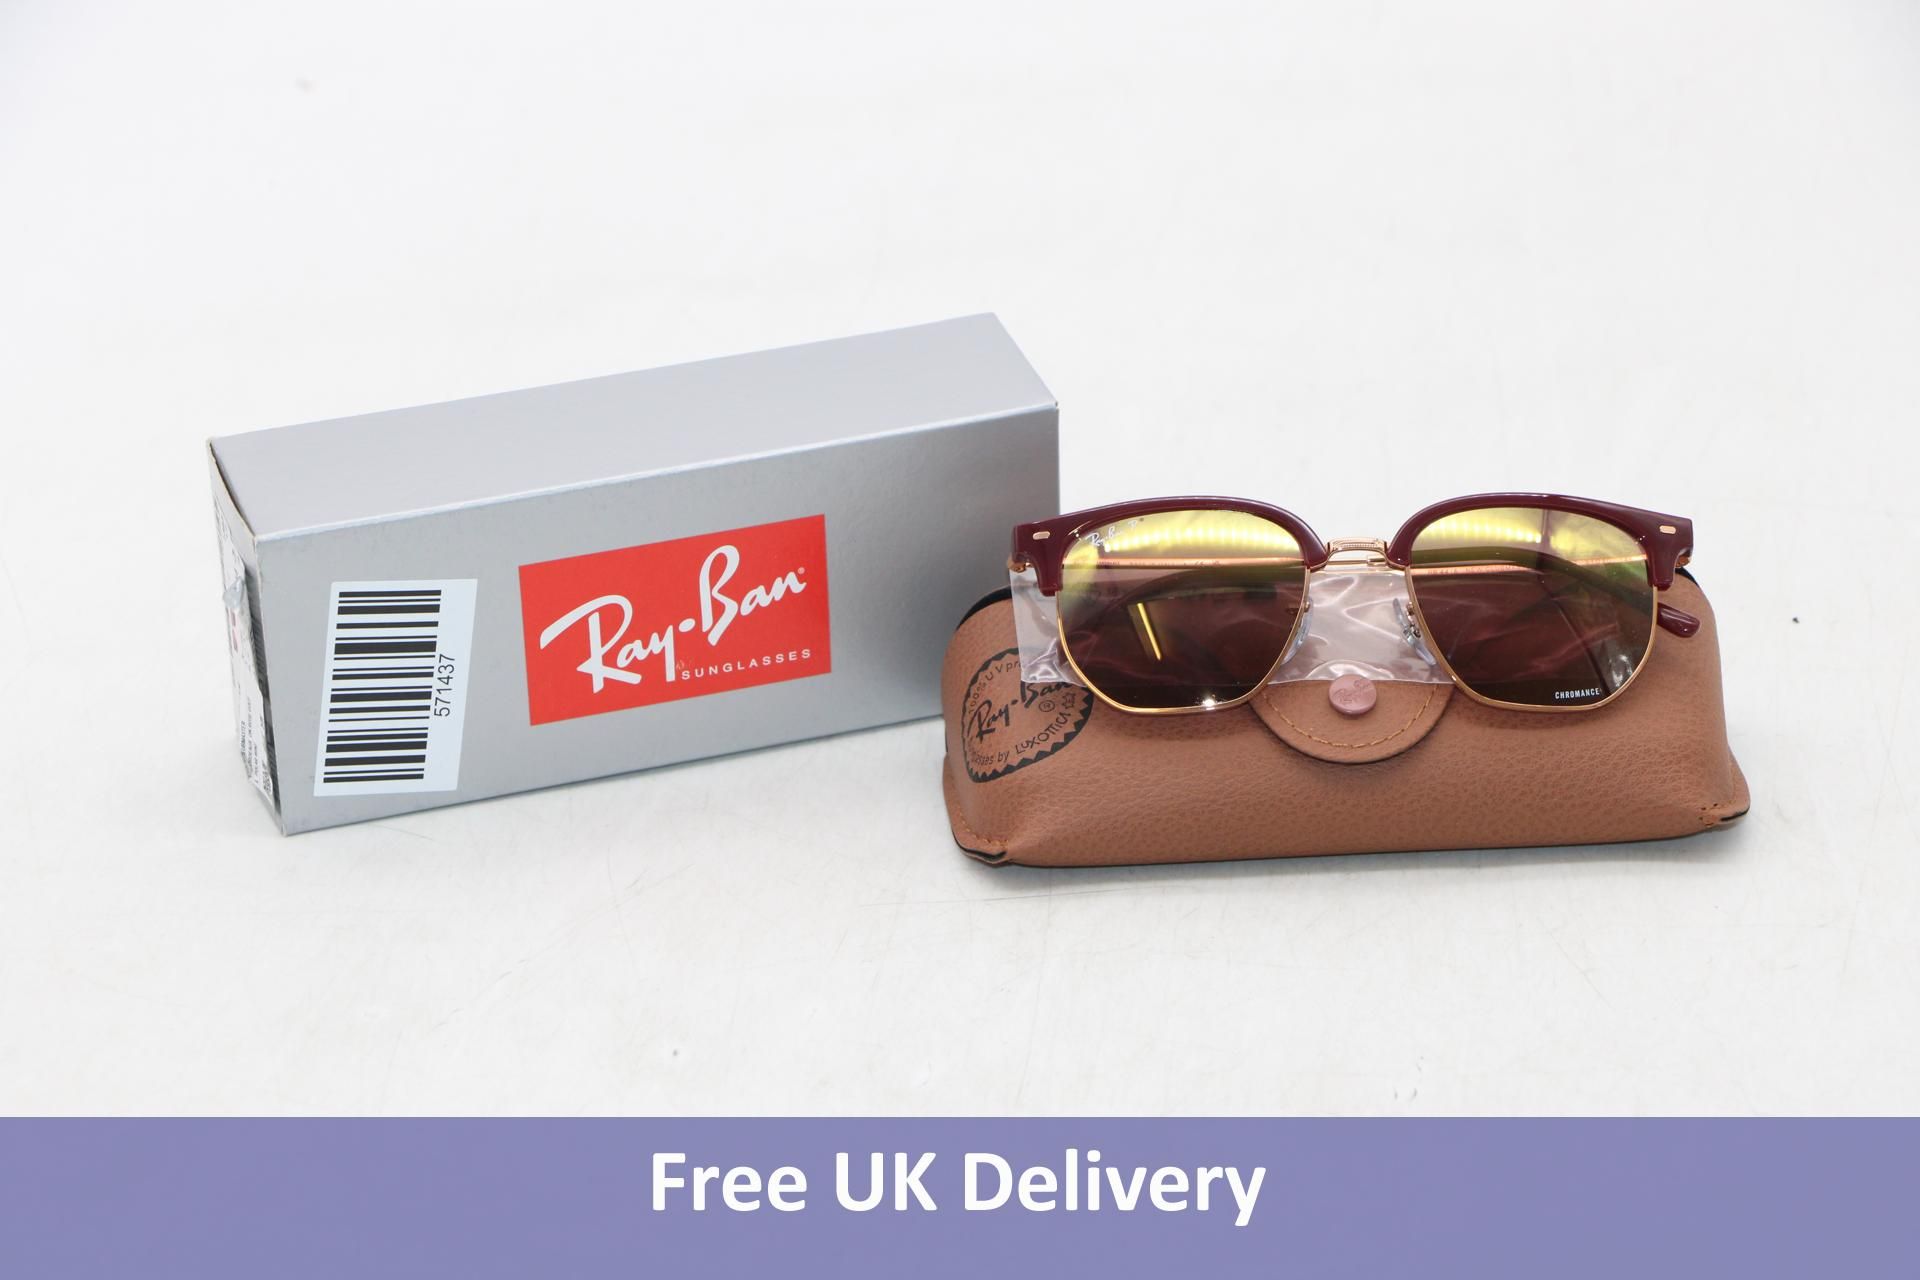 Ray-Ban 0RB4416 New Clubmaster Sunglasses, Red/Bordeaux Rose Gold/Polar Wine Grey Lens